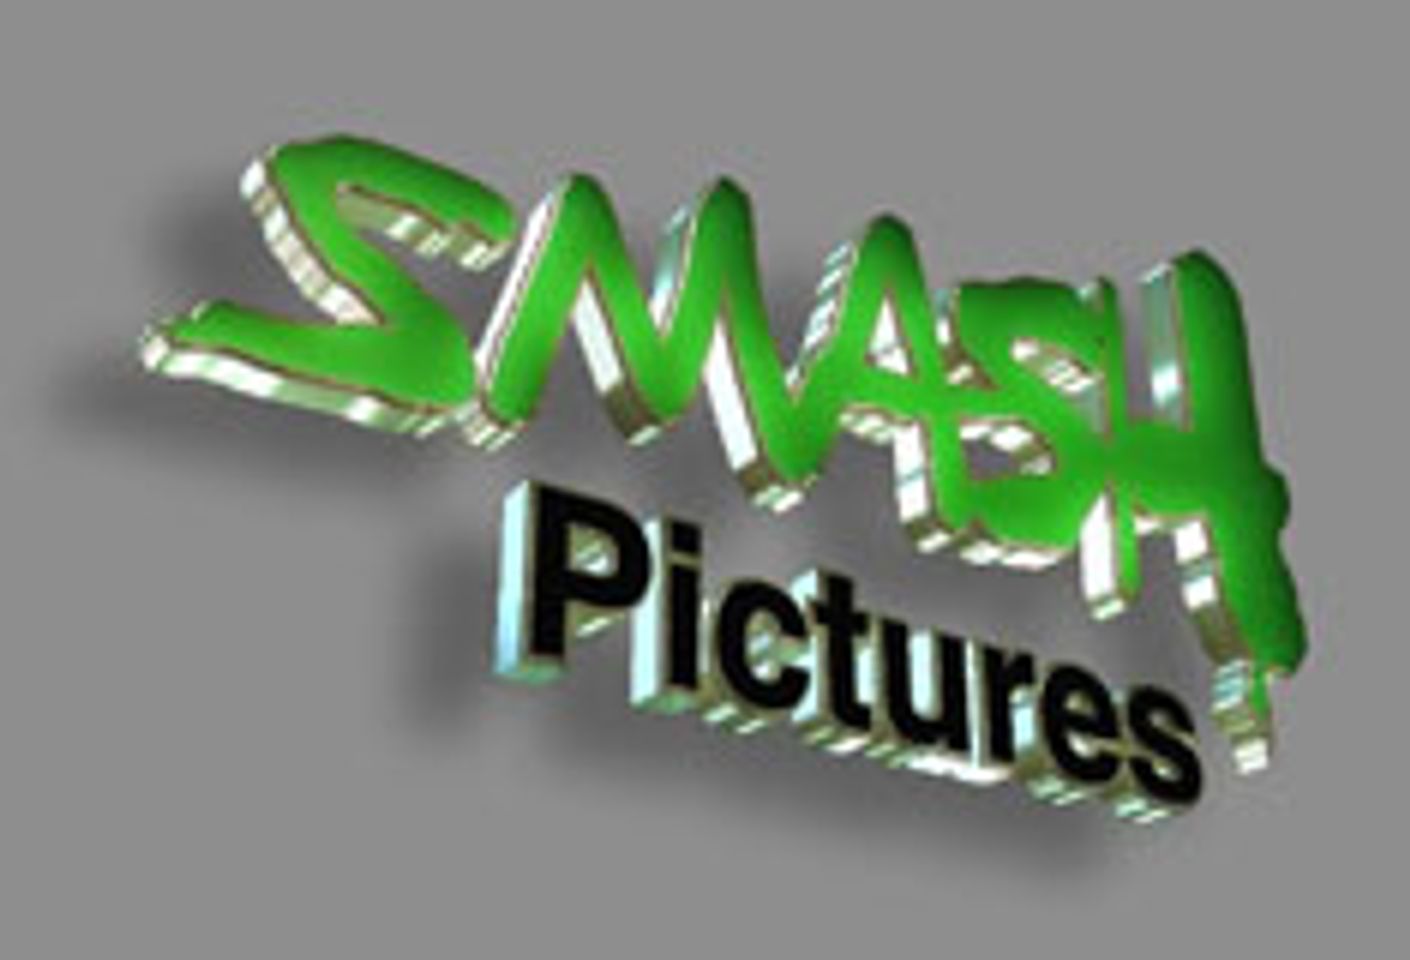 Smash Signs Two New Directors to Helm Young Girl, Amateur Lines